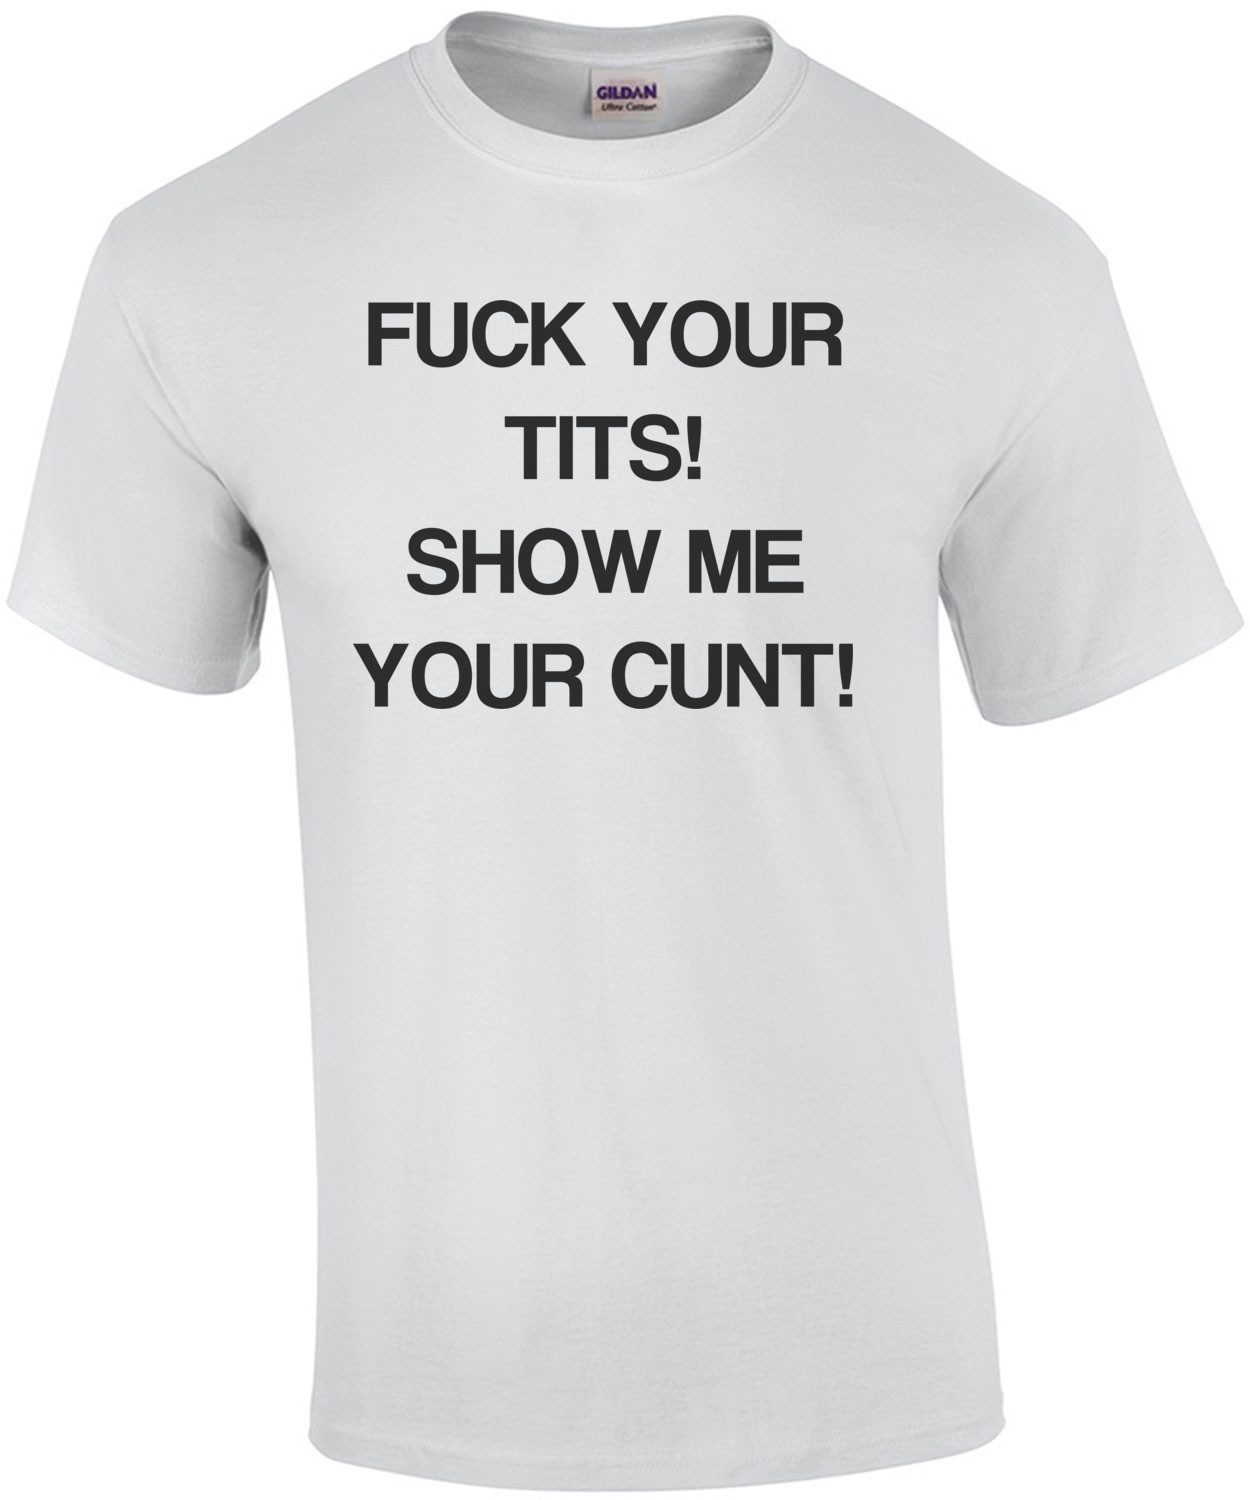 Fuck Your Tits! Show Me Your Cunt! Shirt